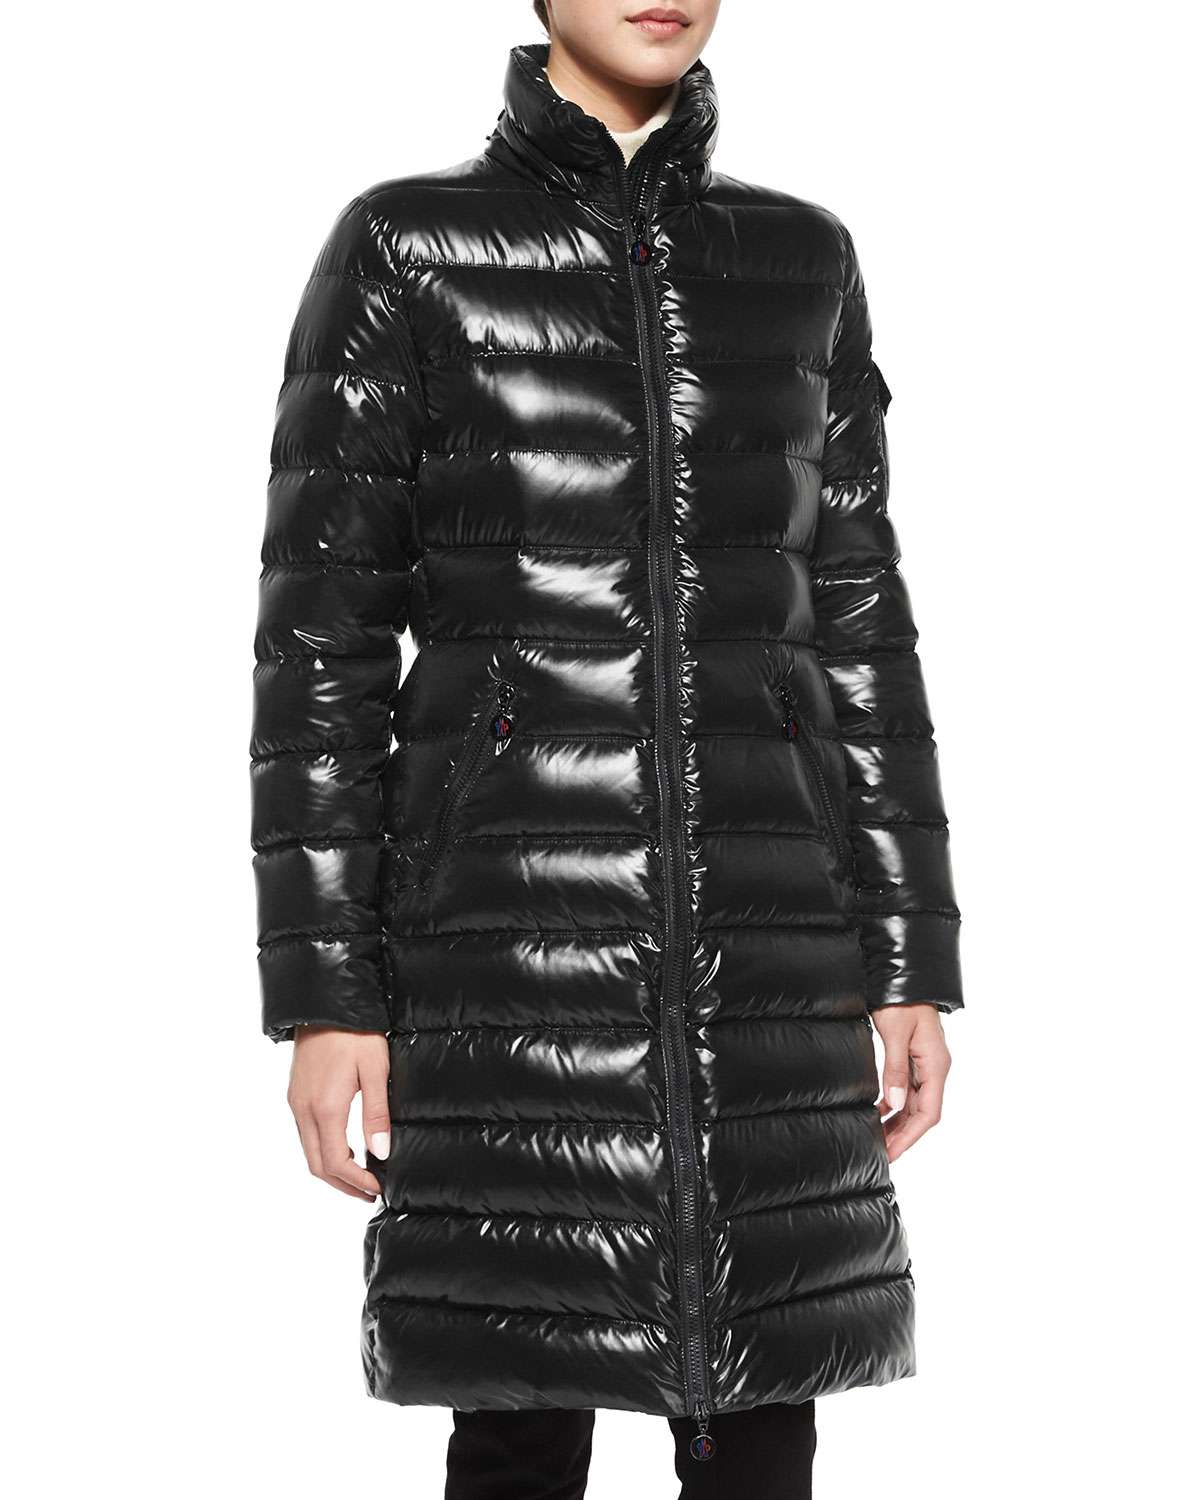 Moncler Moka Shiny Fitted Puffer Coat With Hood in Black | Lyst